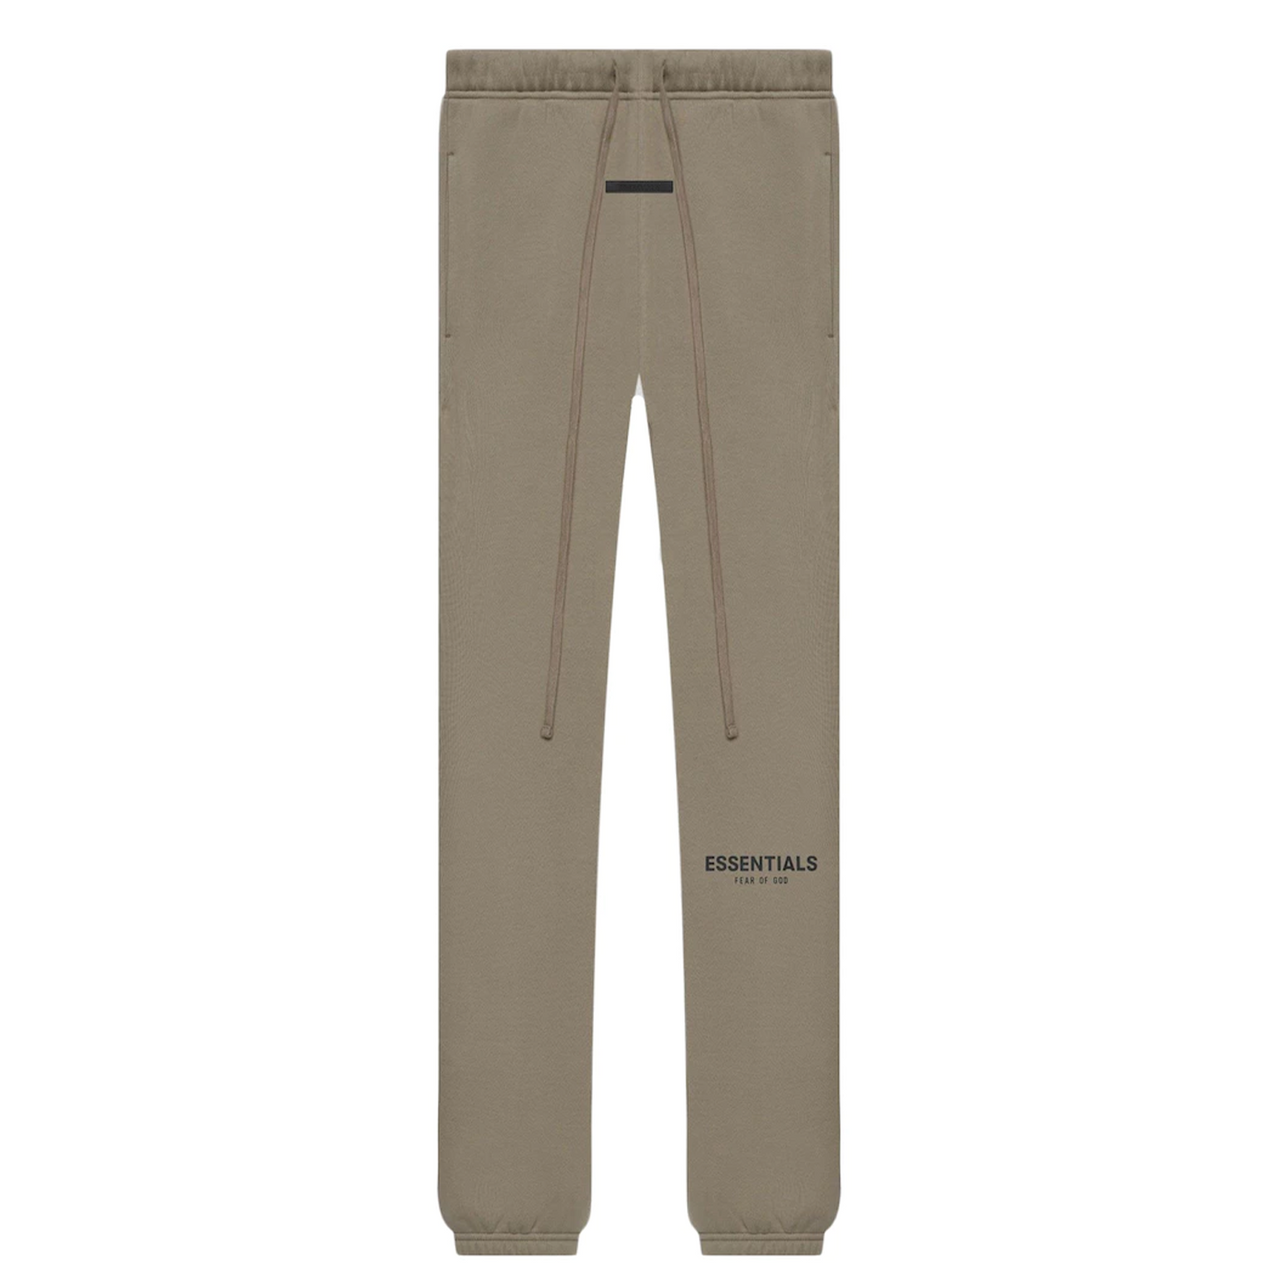 Essentials SS21 Taupe Sweatpants